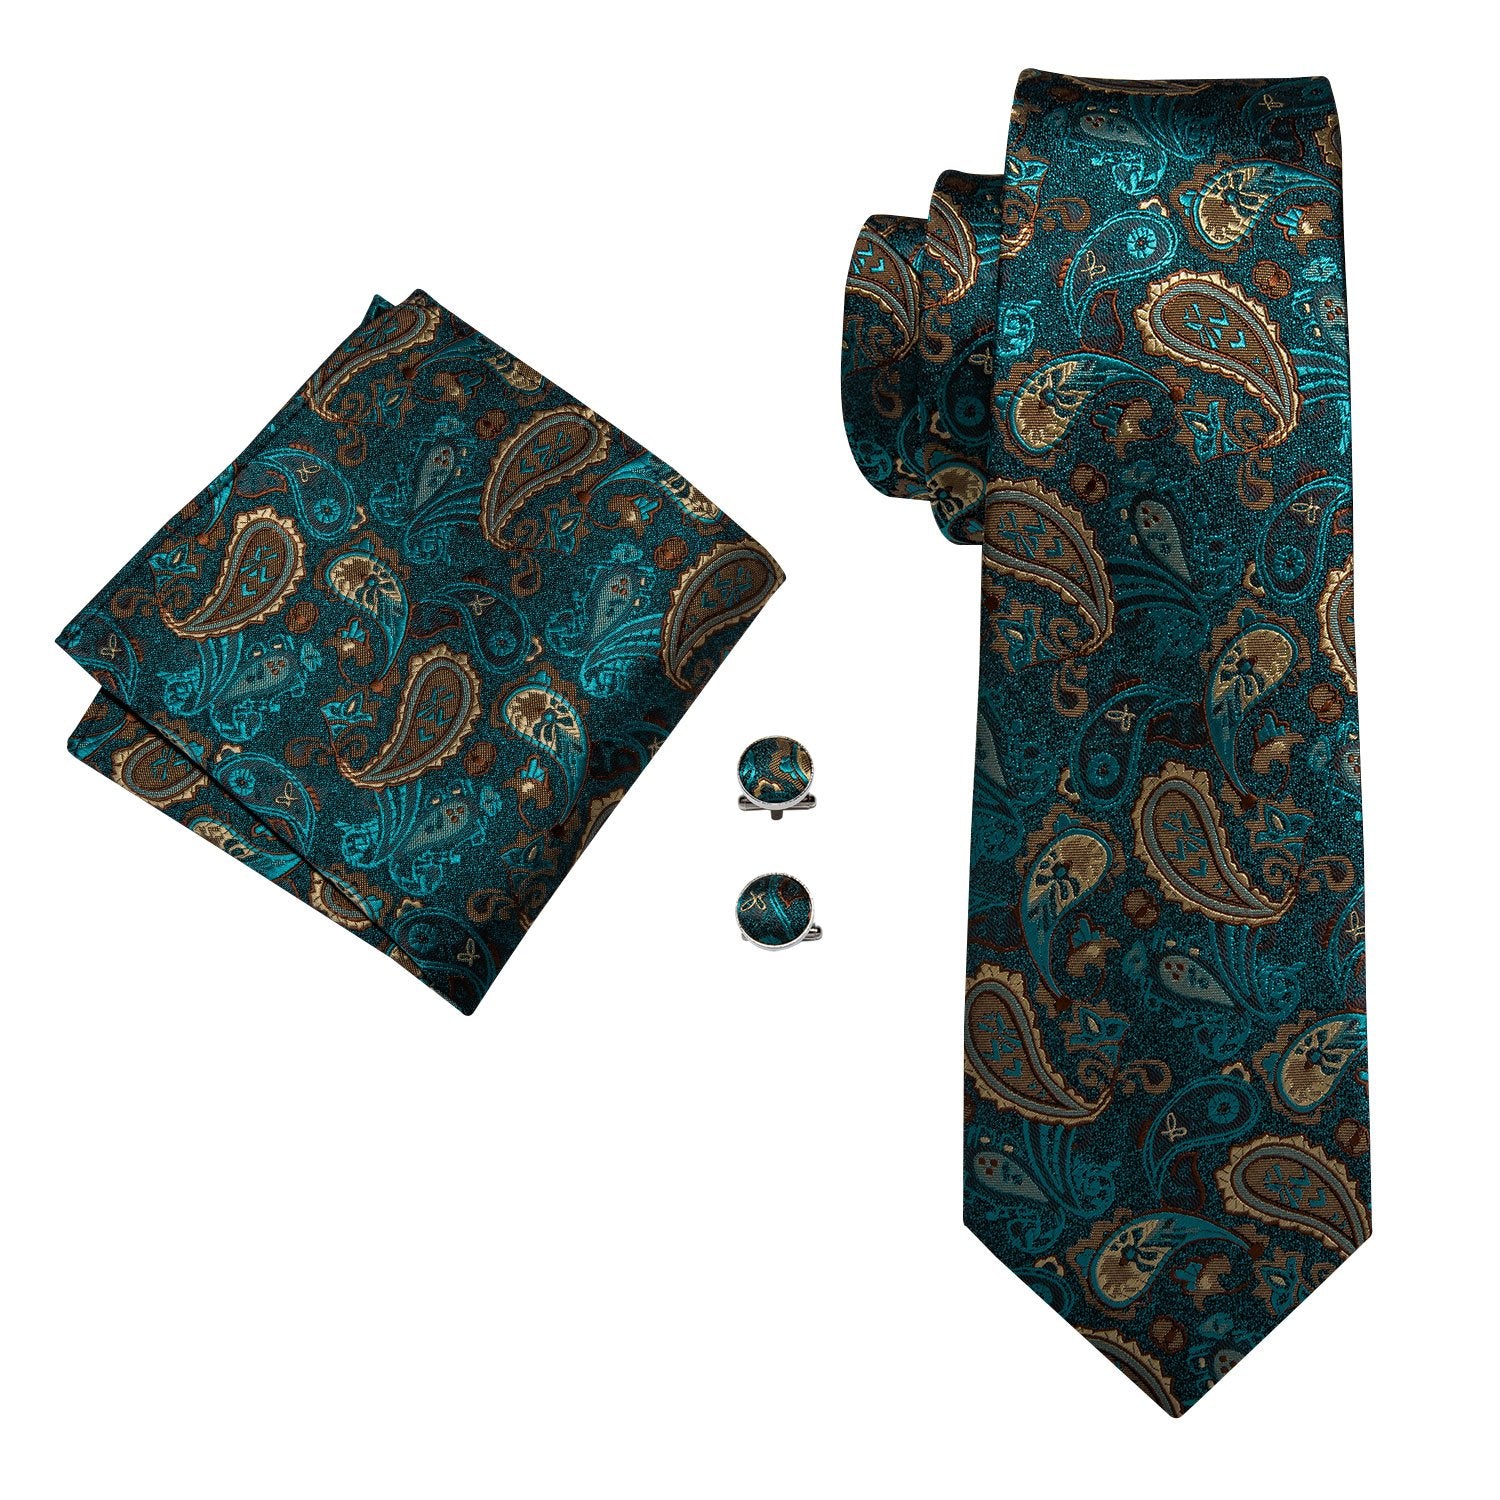 New Luxury Green Brown Paisley Scarf with Tie Set